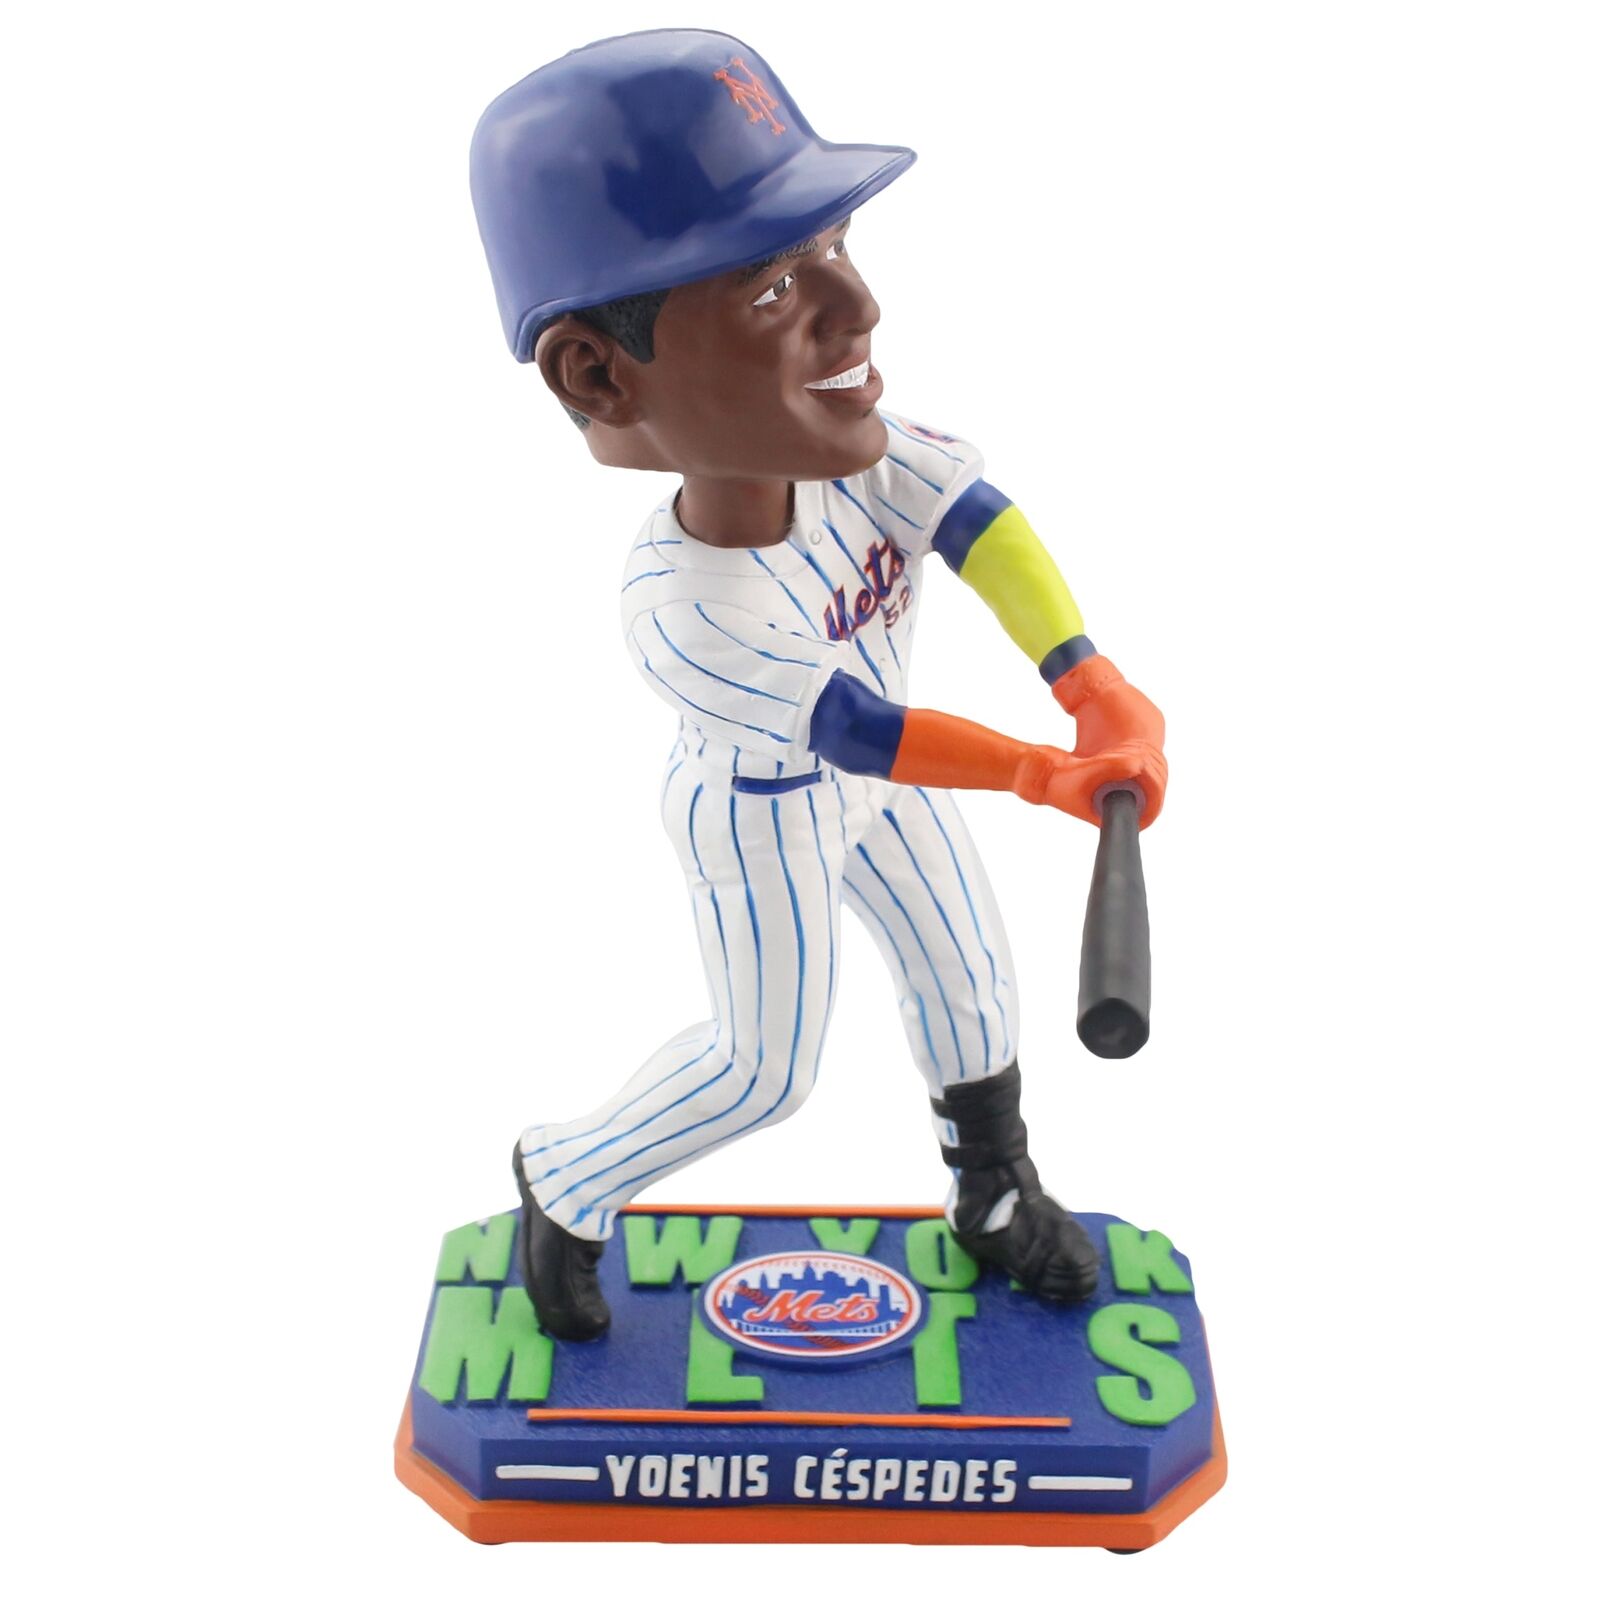 Yoenis Cespedes New York Mets Glow in the Dark Special Edition Bobblehead MLB